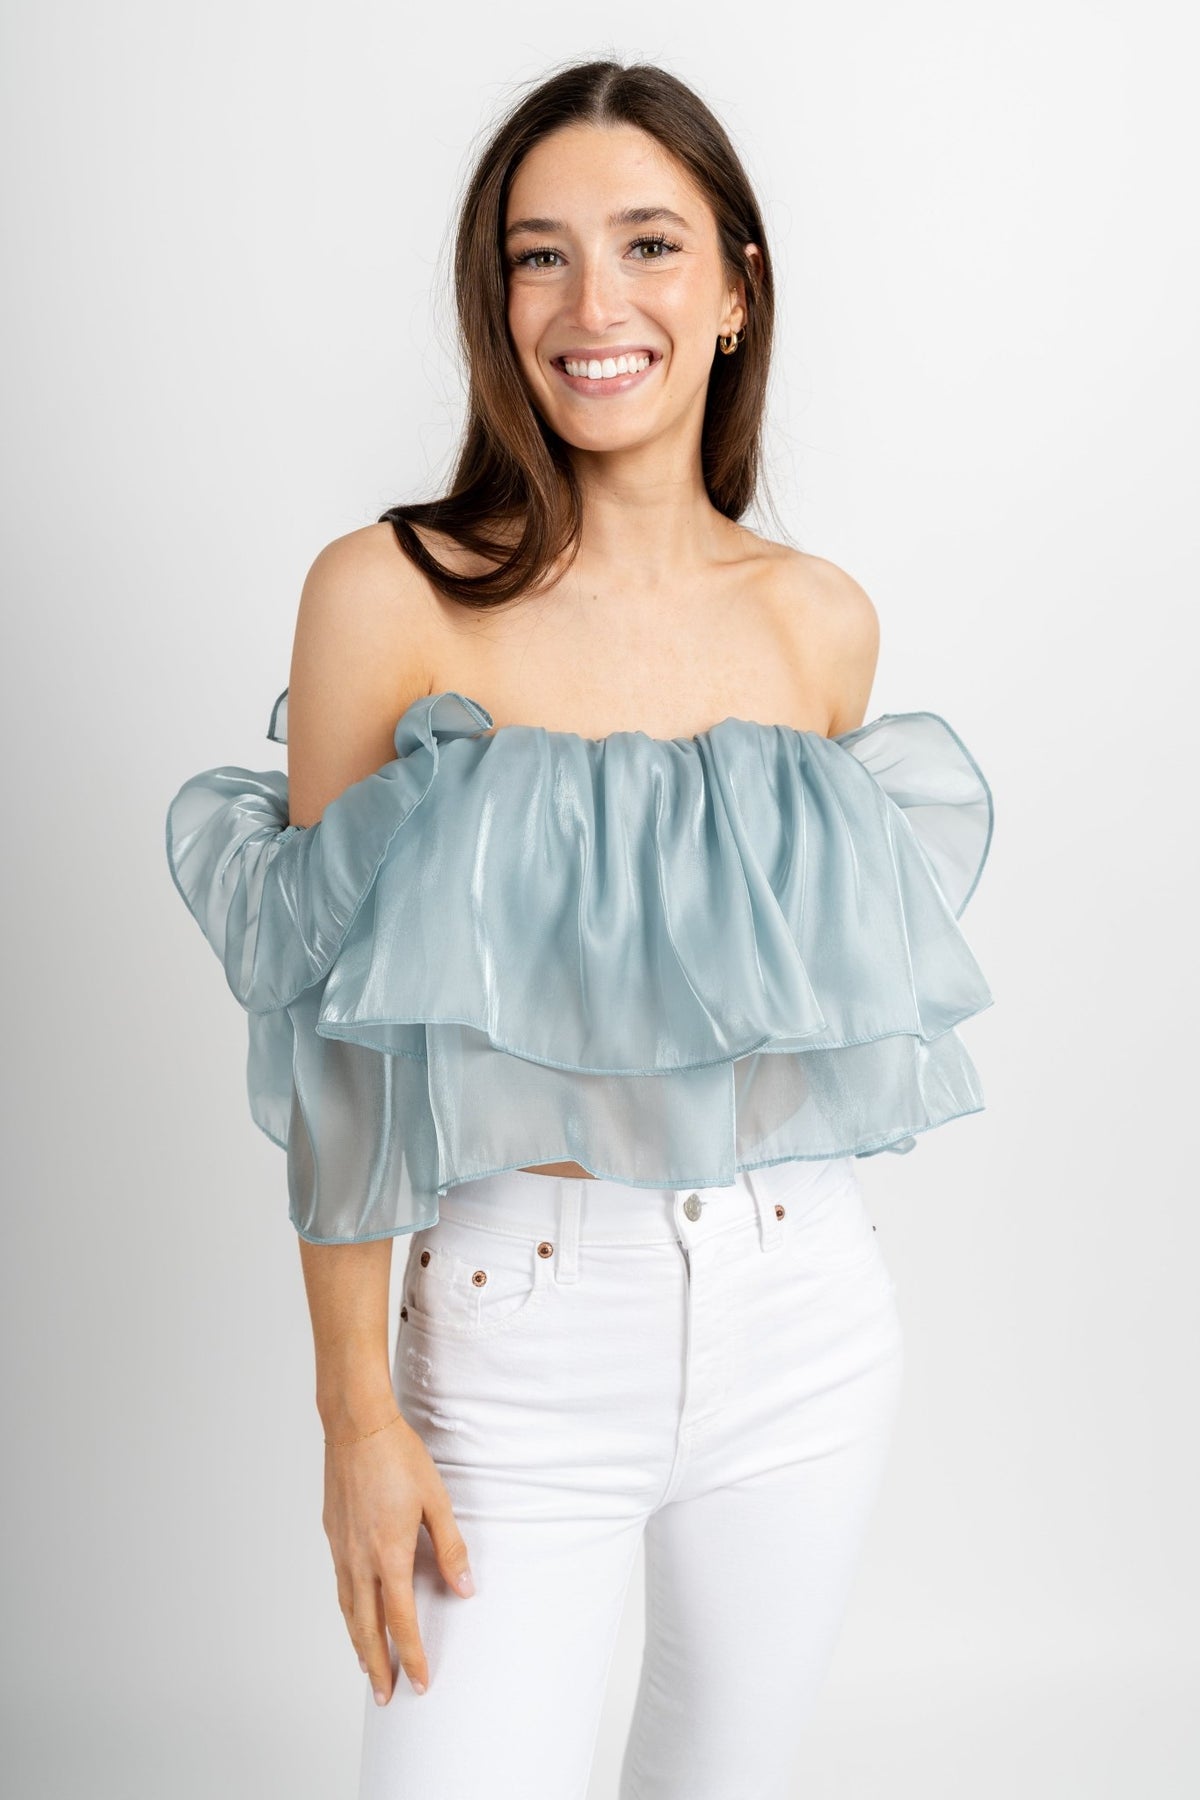 Ruffle off shoulder top dusty blue - Stylish Top - Cute Easter Outfits at Lush Fashion Lounge Boutique in Oklahoma